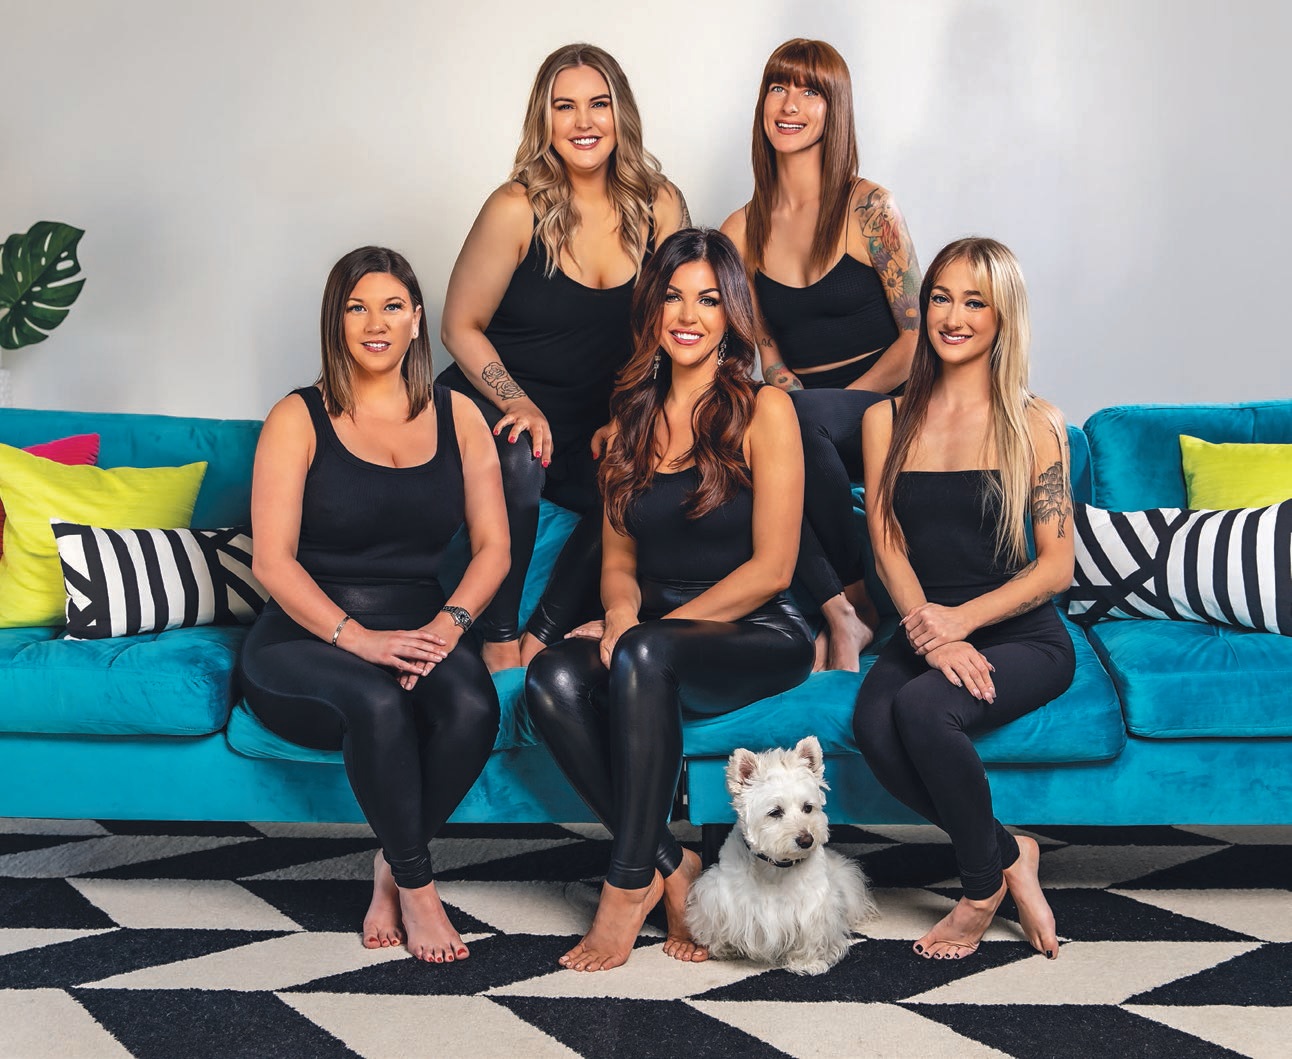 Spray Studio founder and owner Alicia Wente with her incredible team, including her pup, Yeti PHOTOGRAPHED BY RACHAEL ANN GLIEBE/RAG ARTISTRY